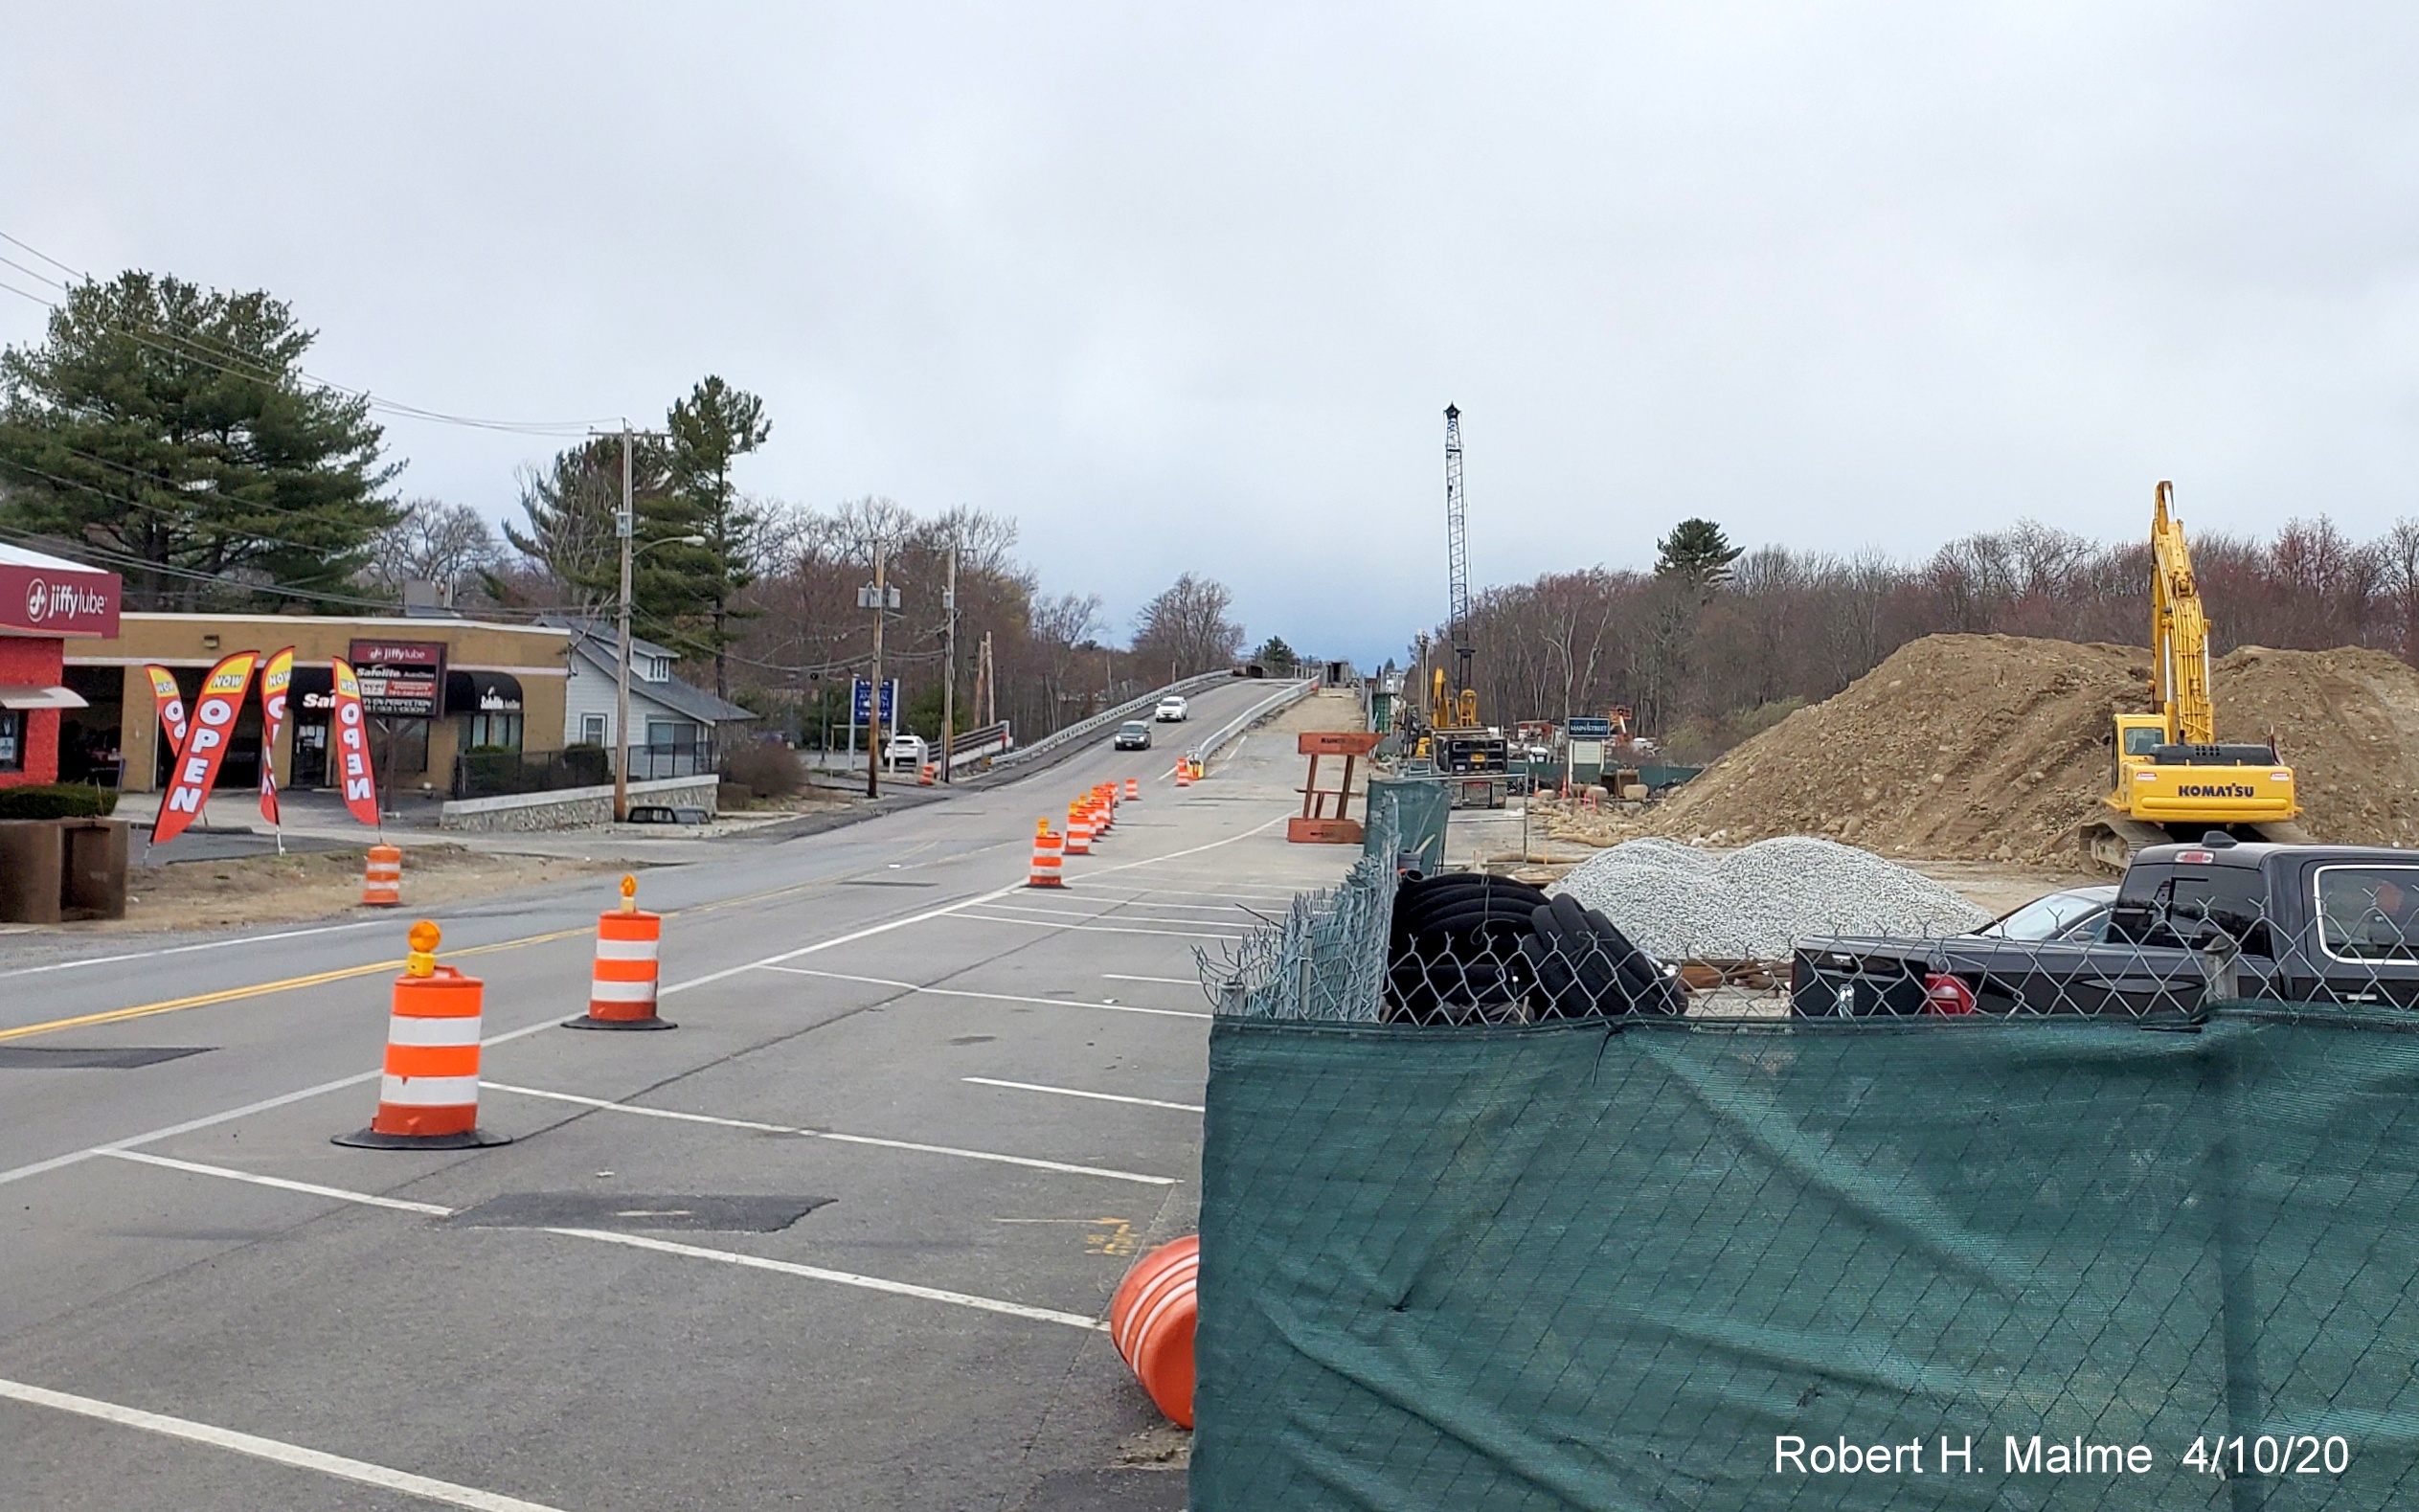 Image of commuter railroad bridge along MA 18 under construction as part of widening project in South Weymouth, taken in April 2020